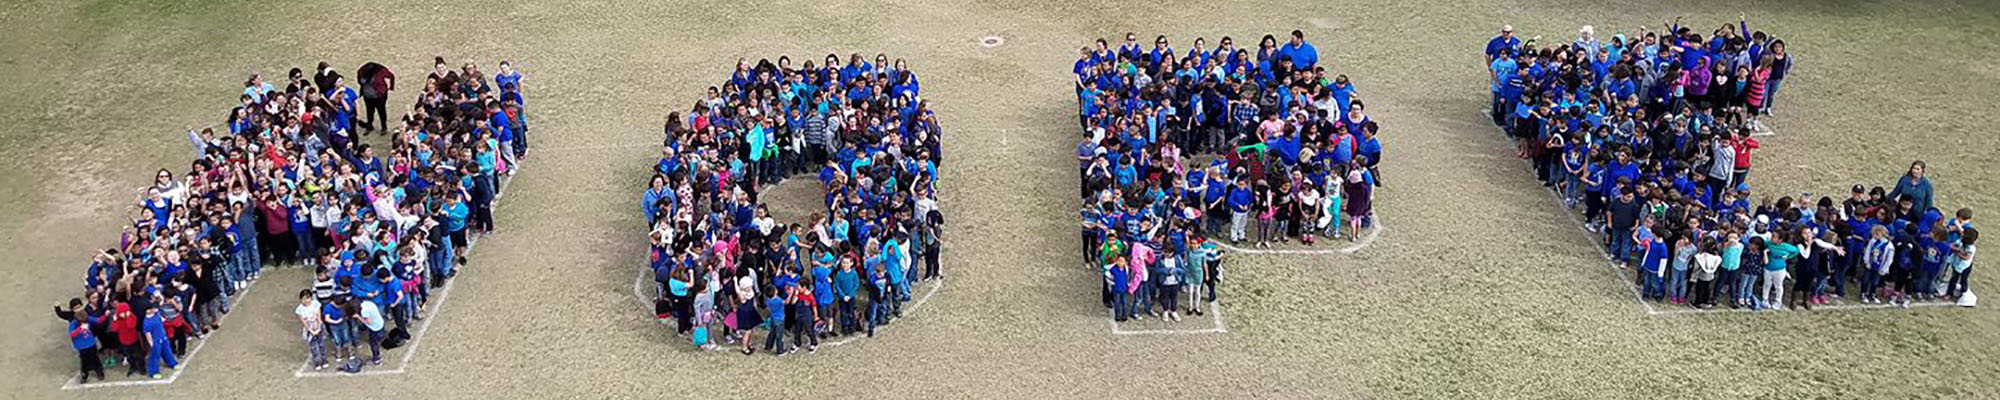 Students stand together outside to form the word hope